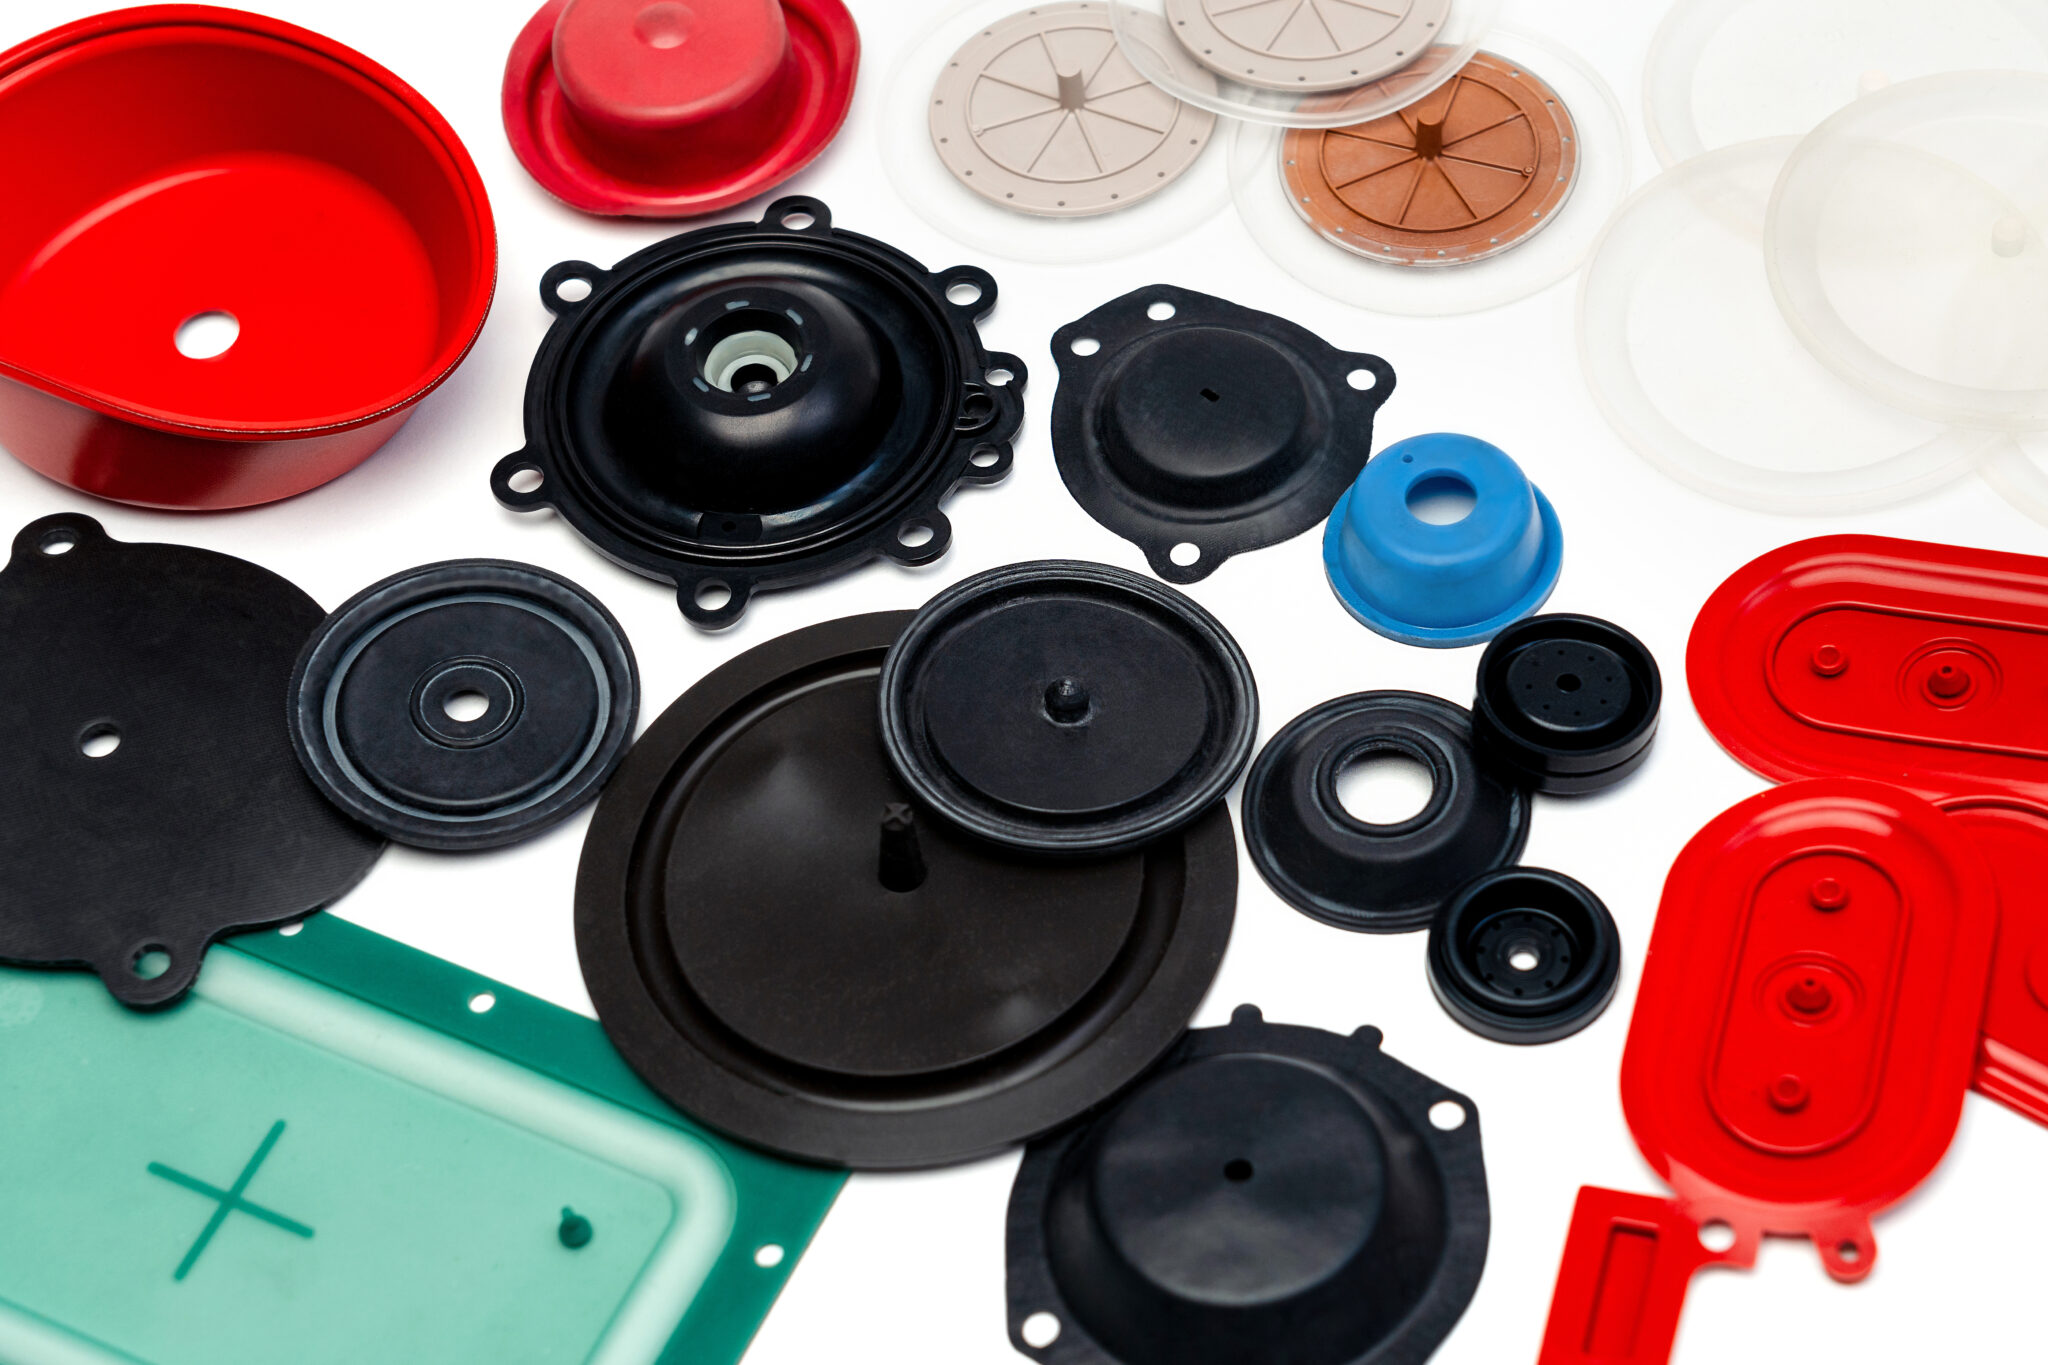 various types of pressure switch diaphragms laid out on a table